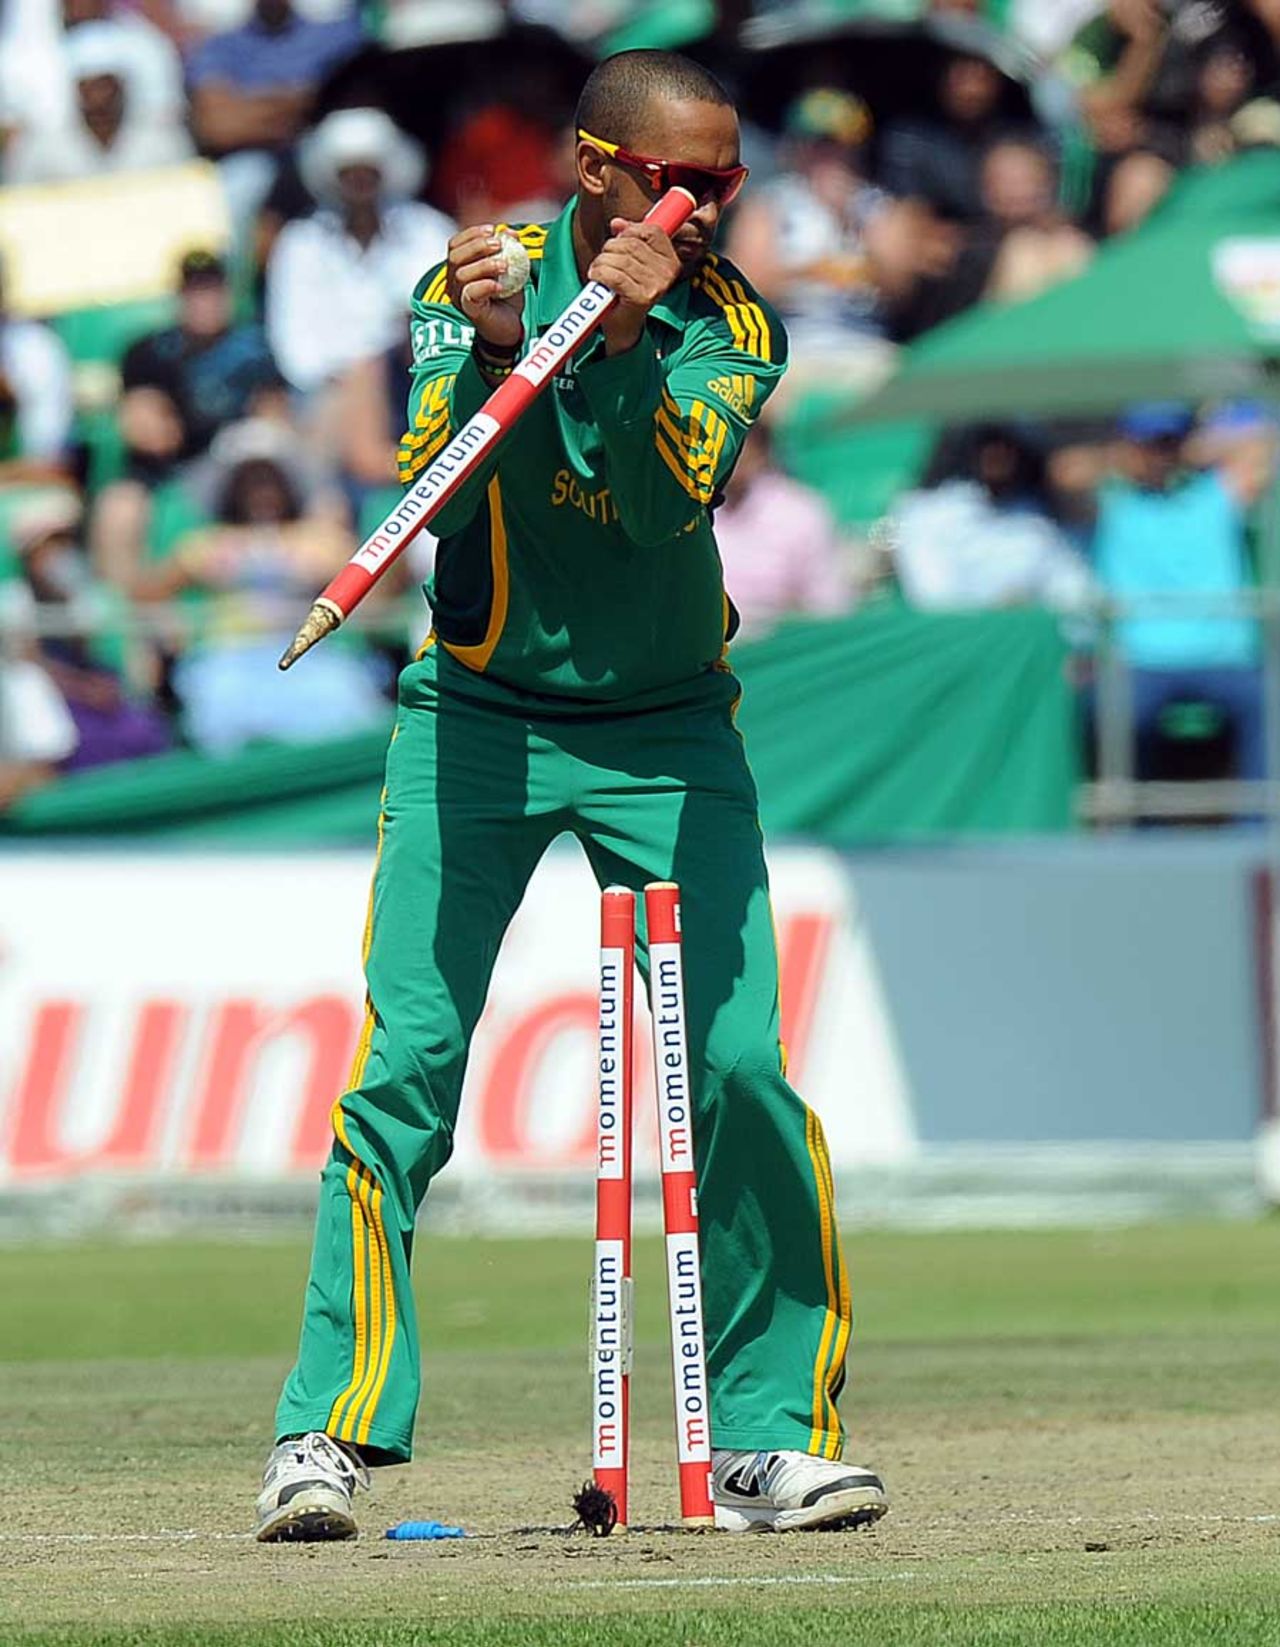 Robin Peterson takes out a stump to run out Wahab Riaz, South Africa v Pakistan, 5th ODI, Benoni, March 24, 2013